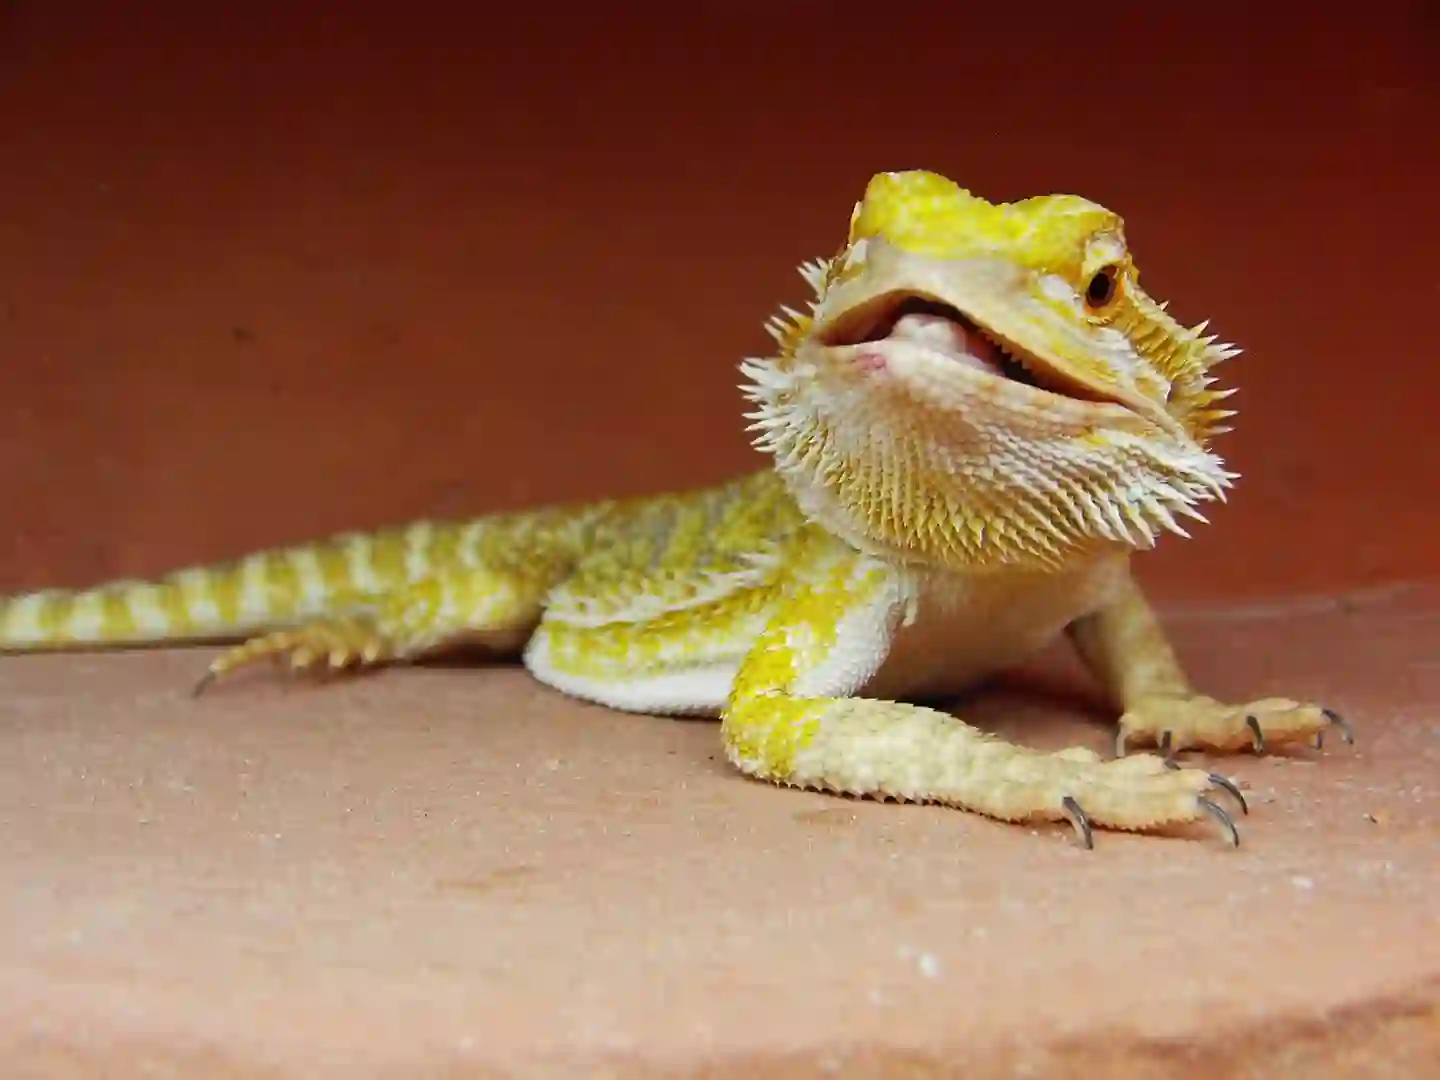 Can Bearded Dragons Eat Dates?